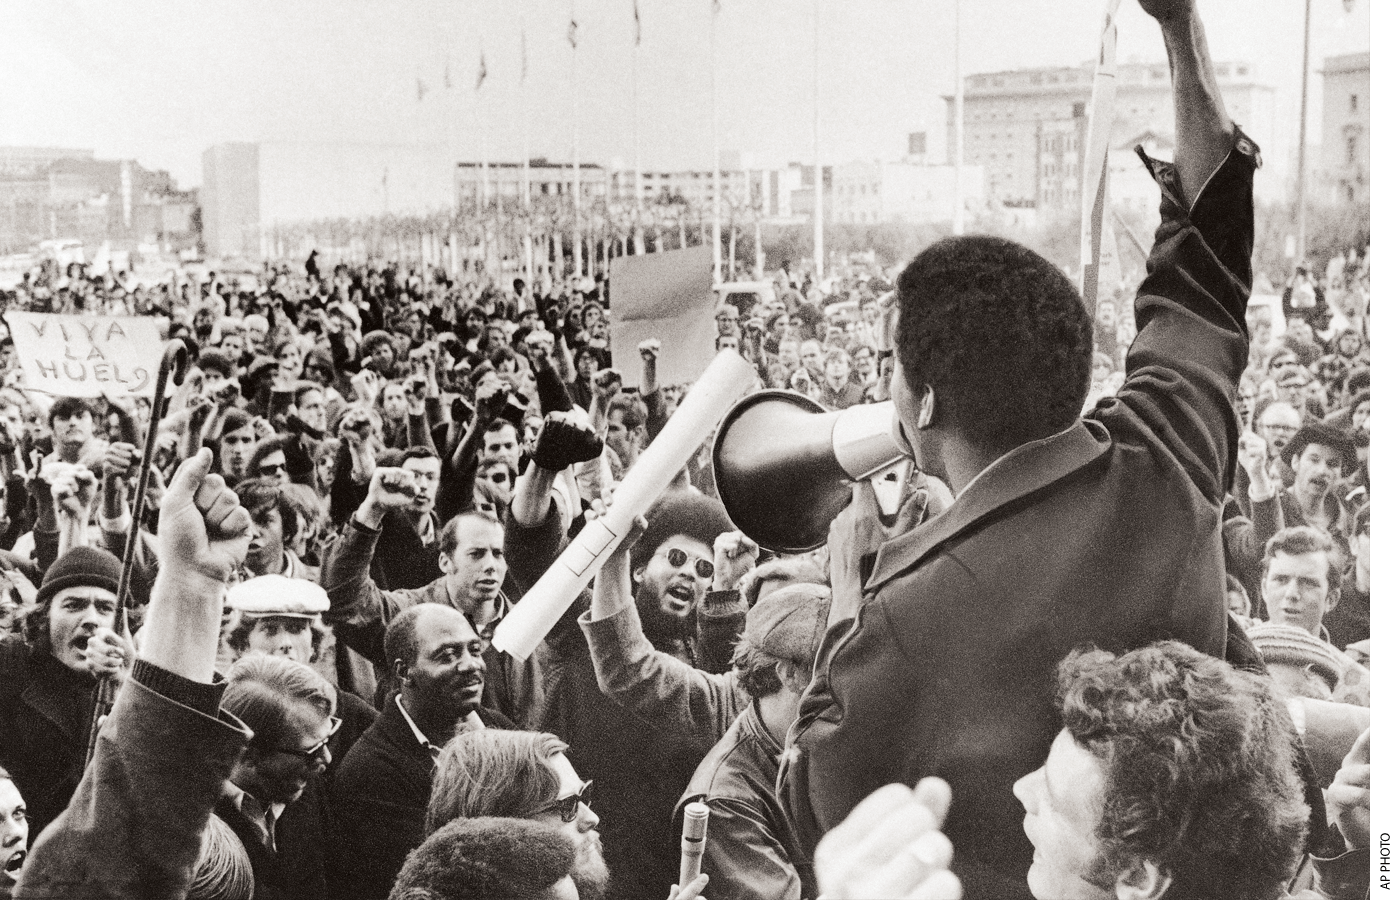 A Black Students Union leader in front of a crowd of demonstrators at College in December 1968.